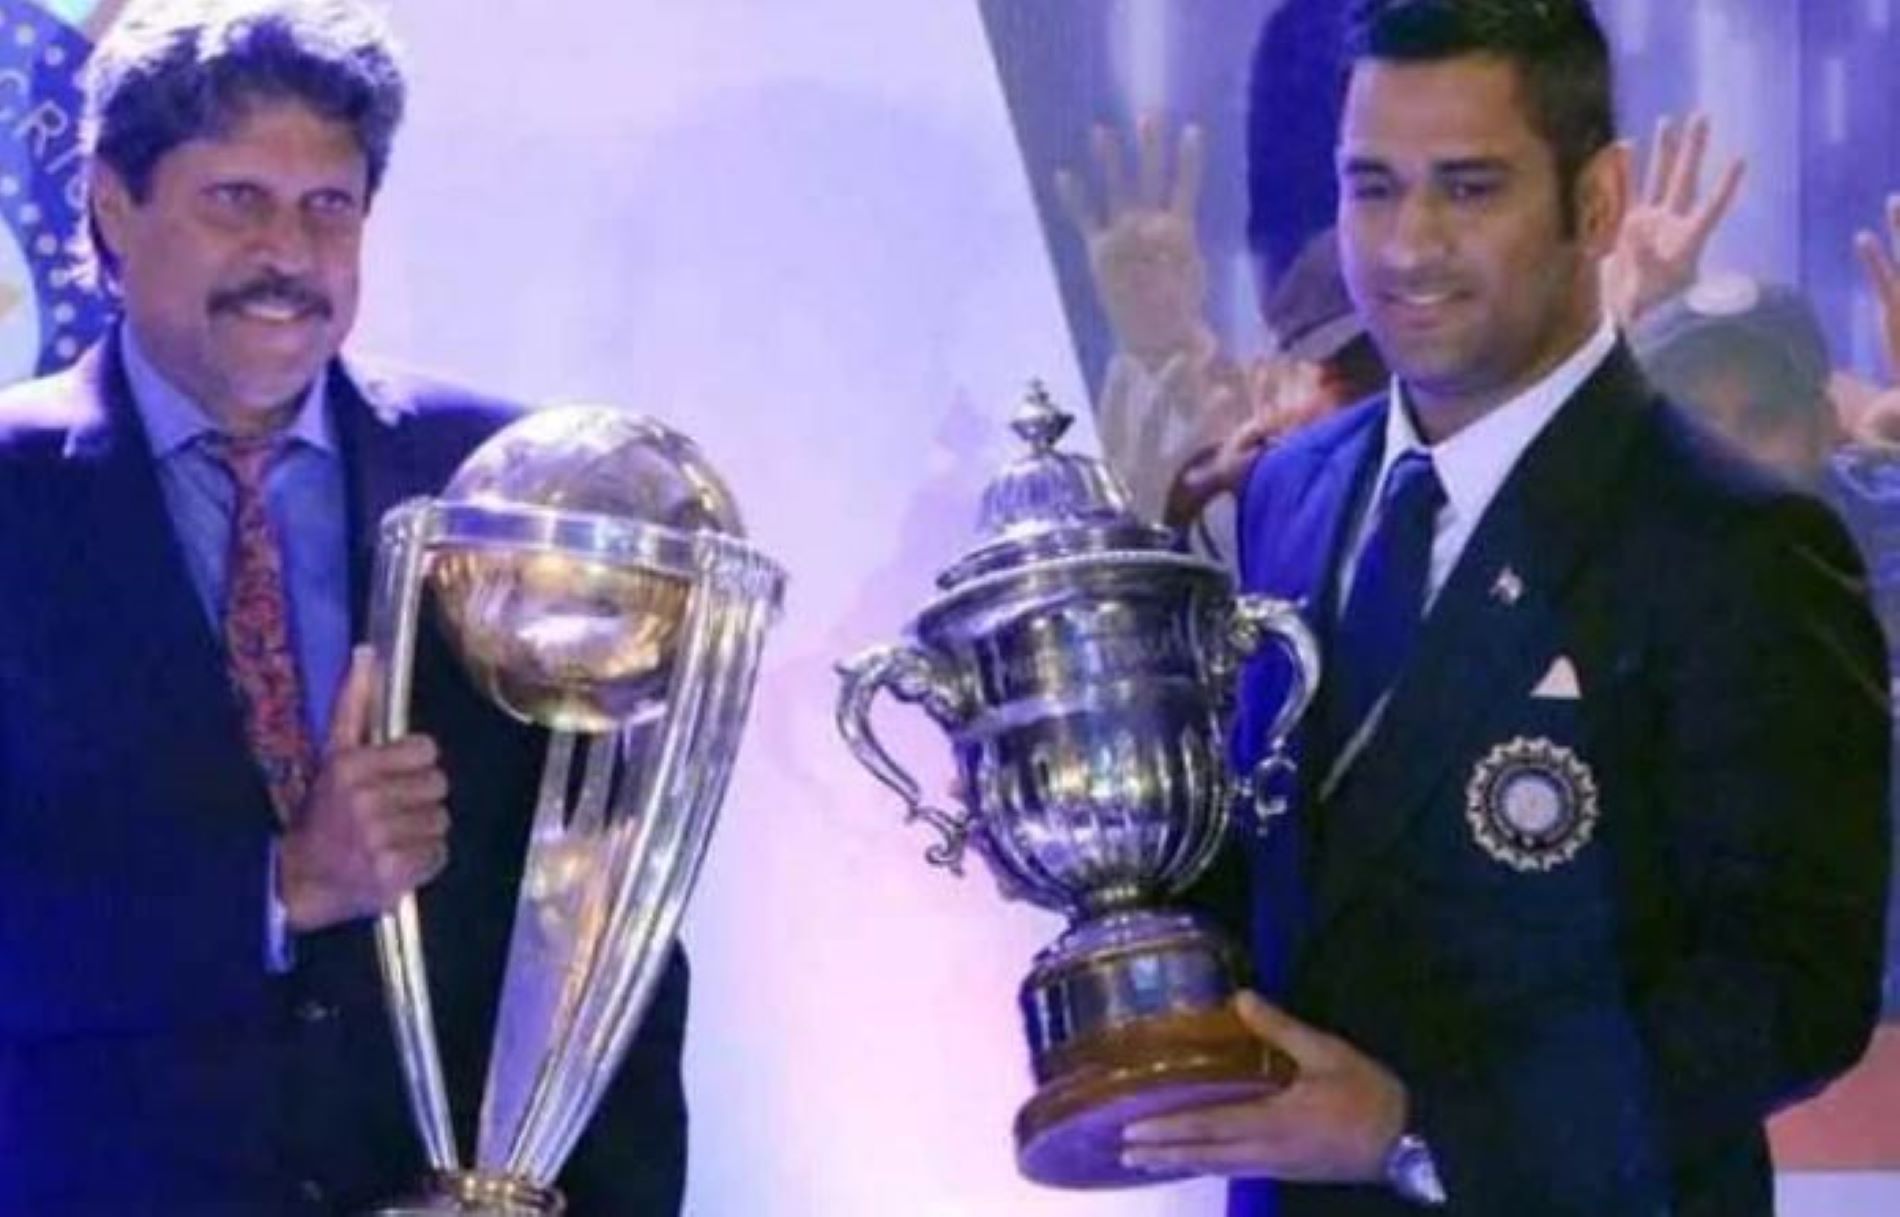 Kapil Dev and MS Dhoni are the only Indian captains to have lifted the World Cup.